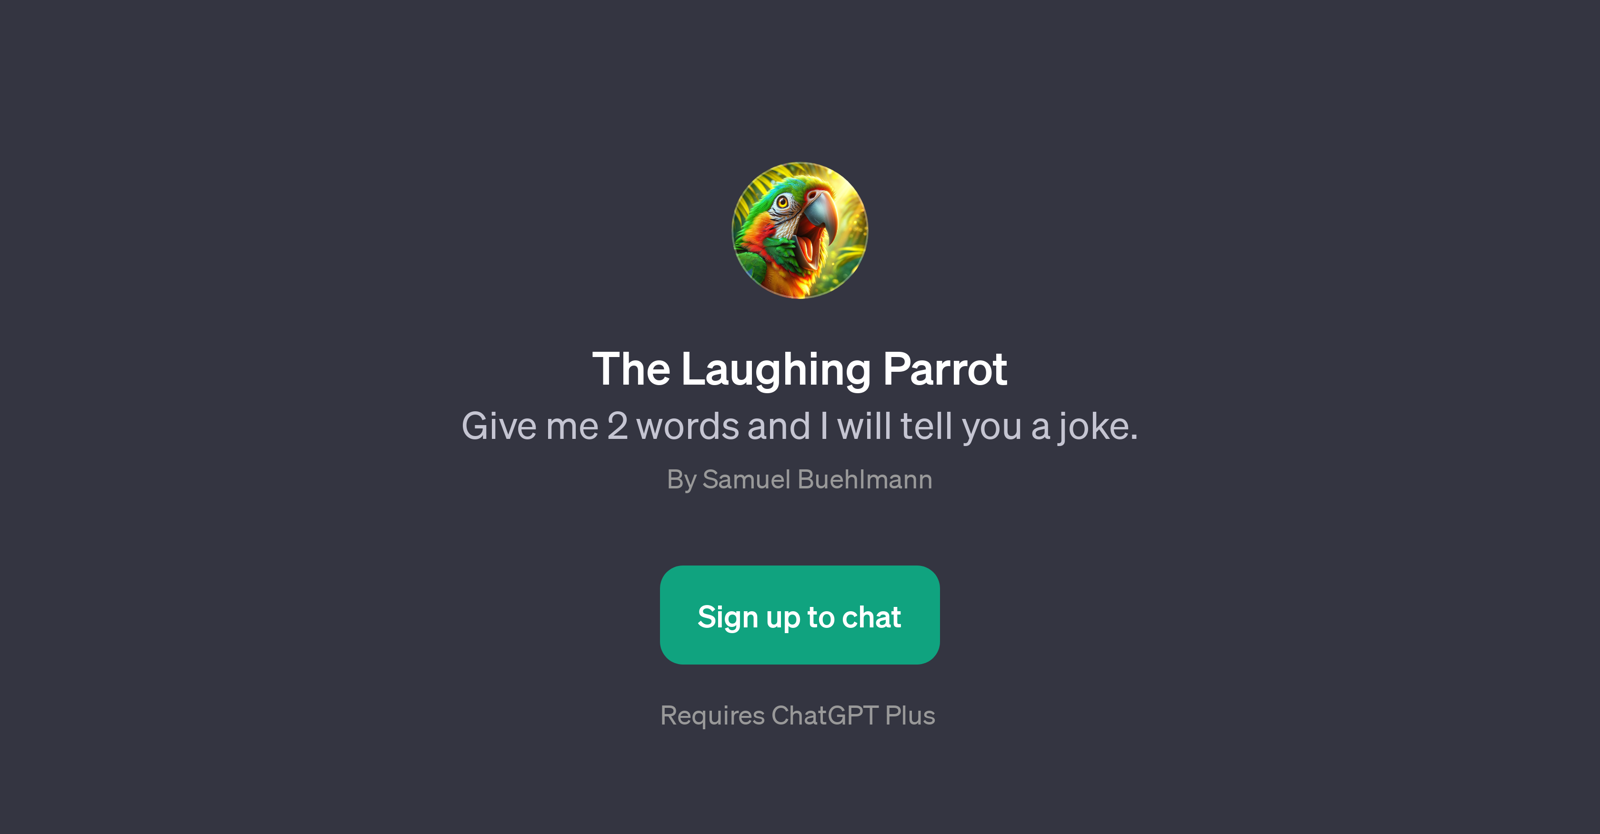 The Laughing Parrot website